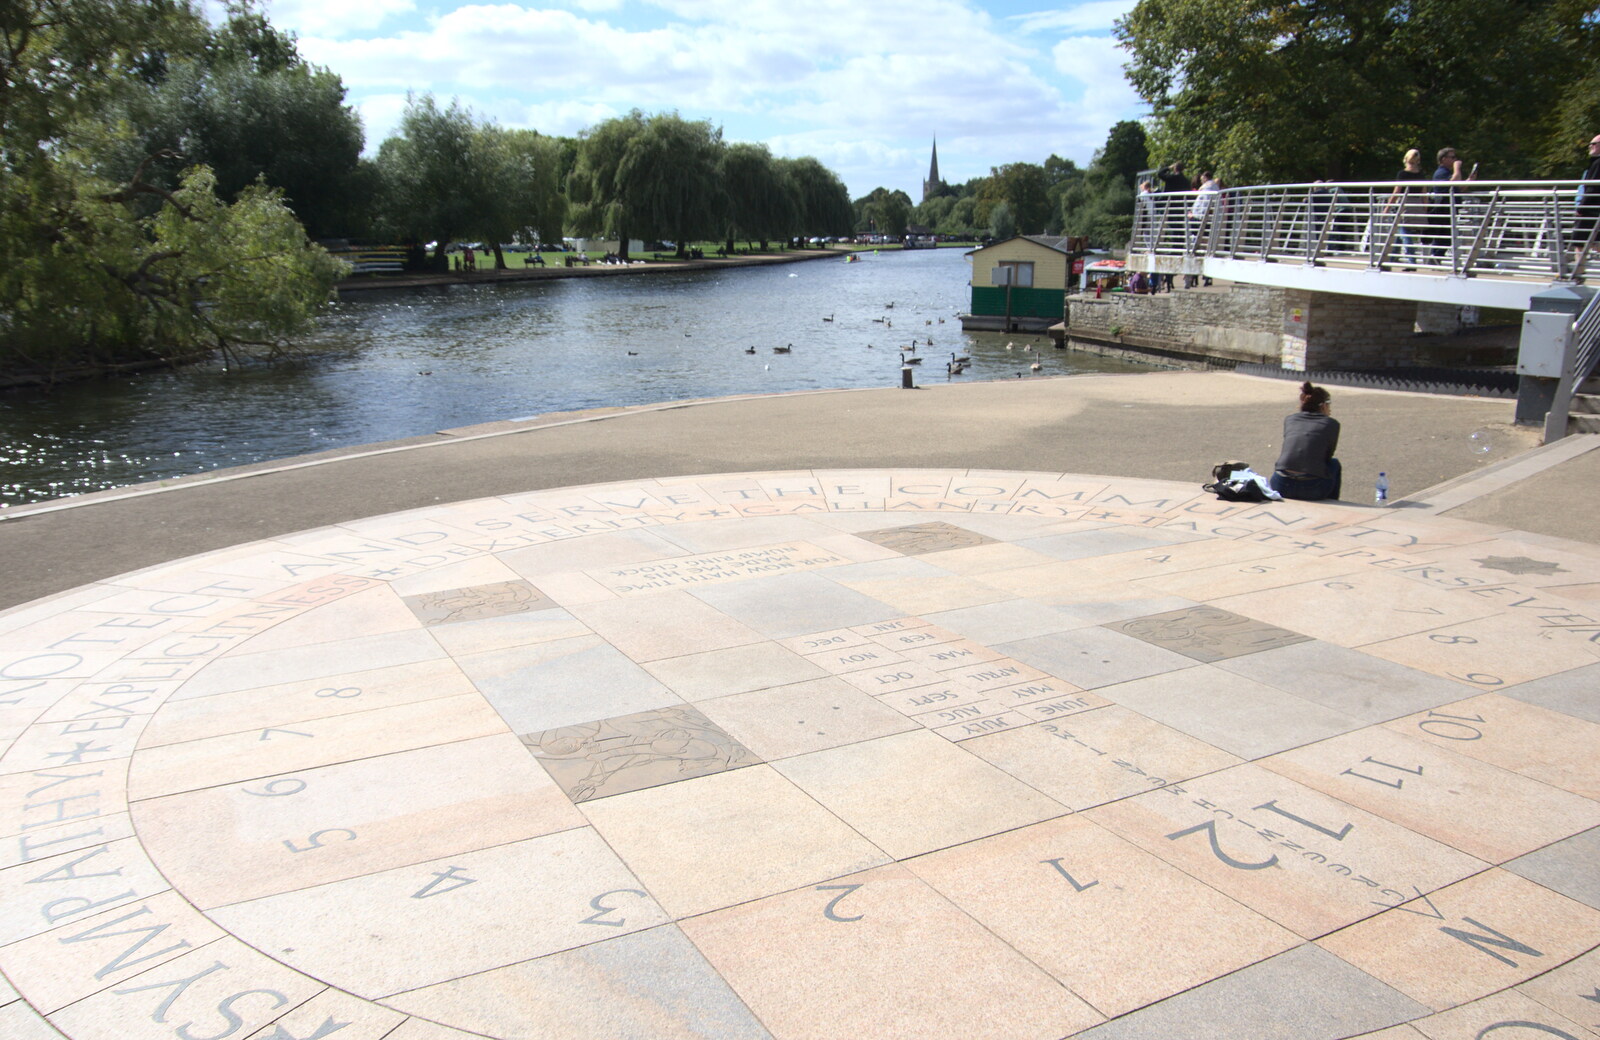 A big clock/sundial pavement thing from A Postcard from Stratford-upon-Avon, Warwickshire - 9th September 2018